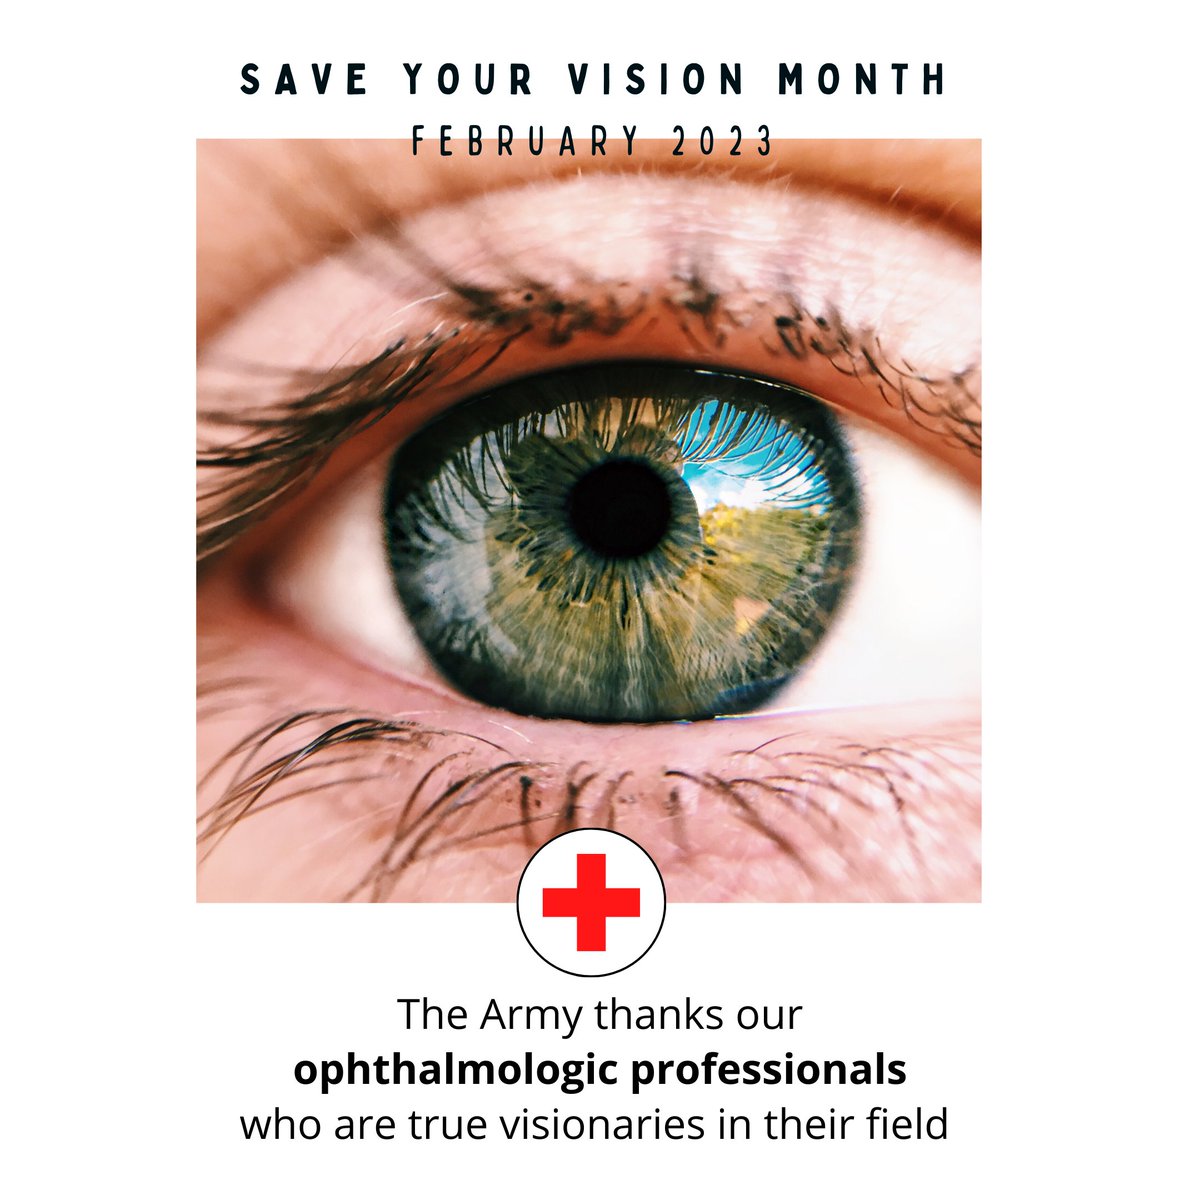 Looking forward to Save Your Vision Month? If you would like to learn how you can join our dedicated group of #visionaries, text BMC7 to 462769 to speak with a healthcare career counselor in your area. #eyehealtheducation @usarec  @goarmymed  | @AOAConnect  @ucd_eyecenter